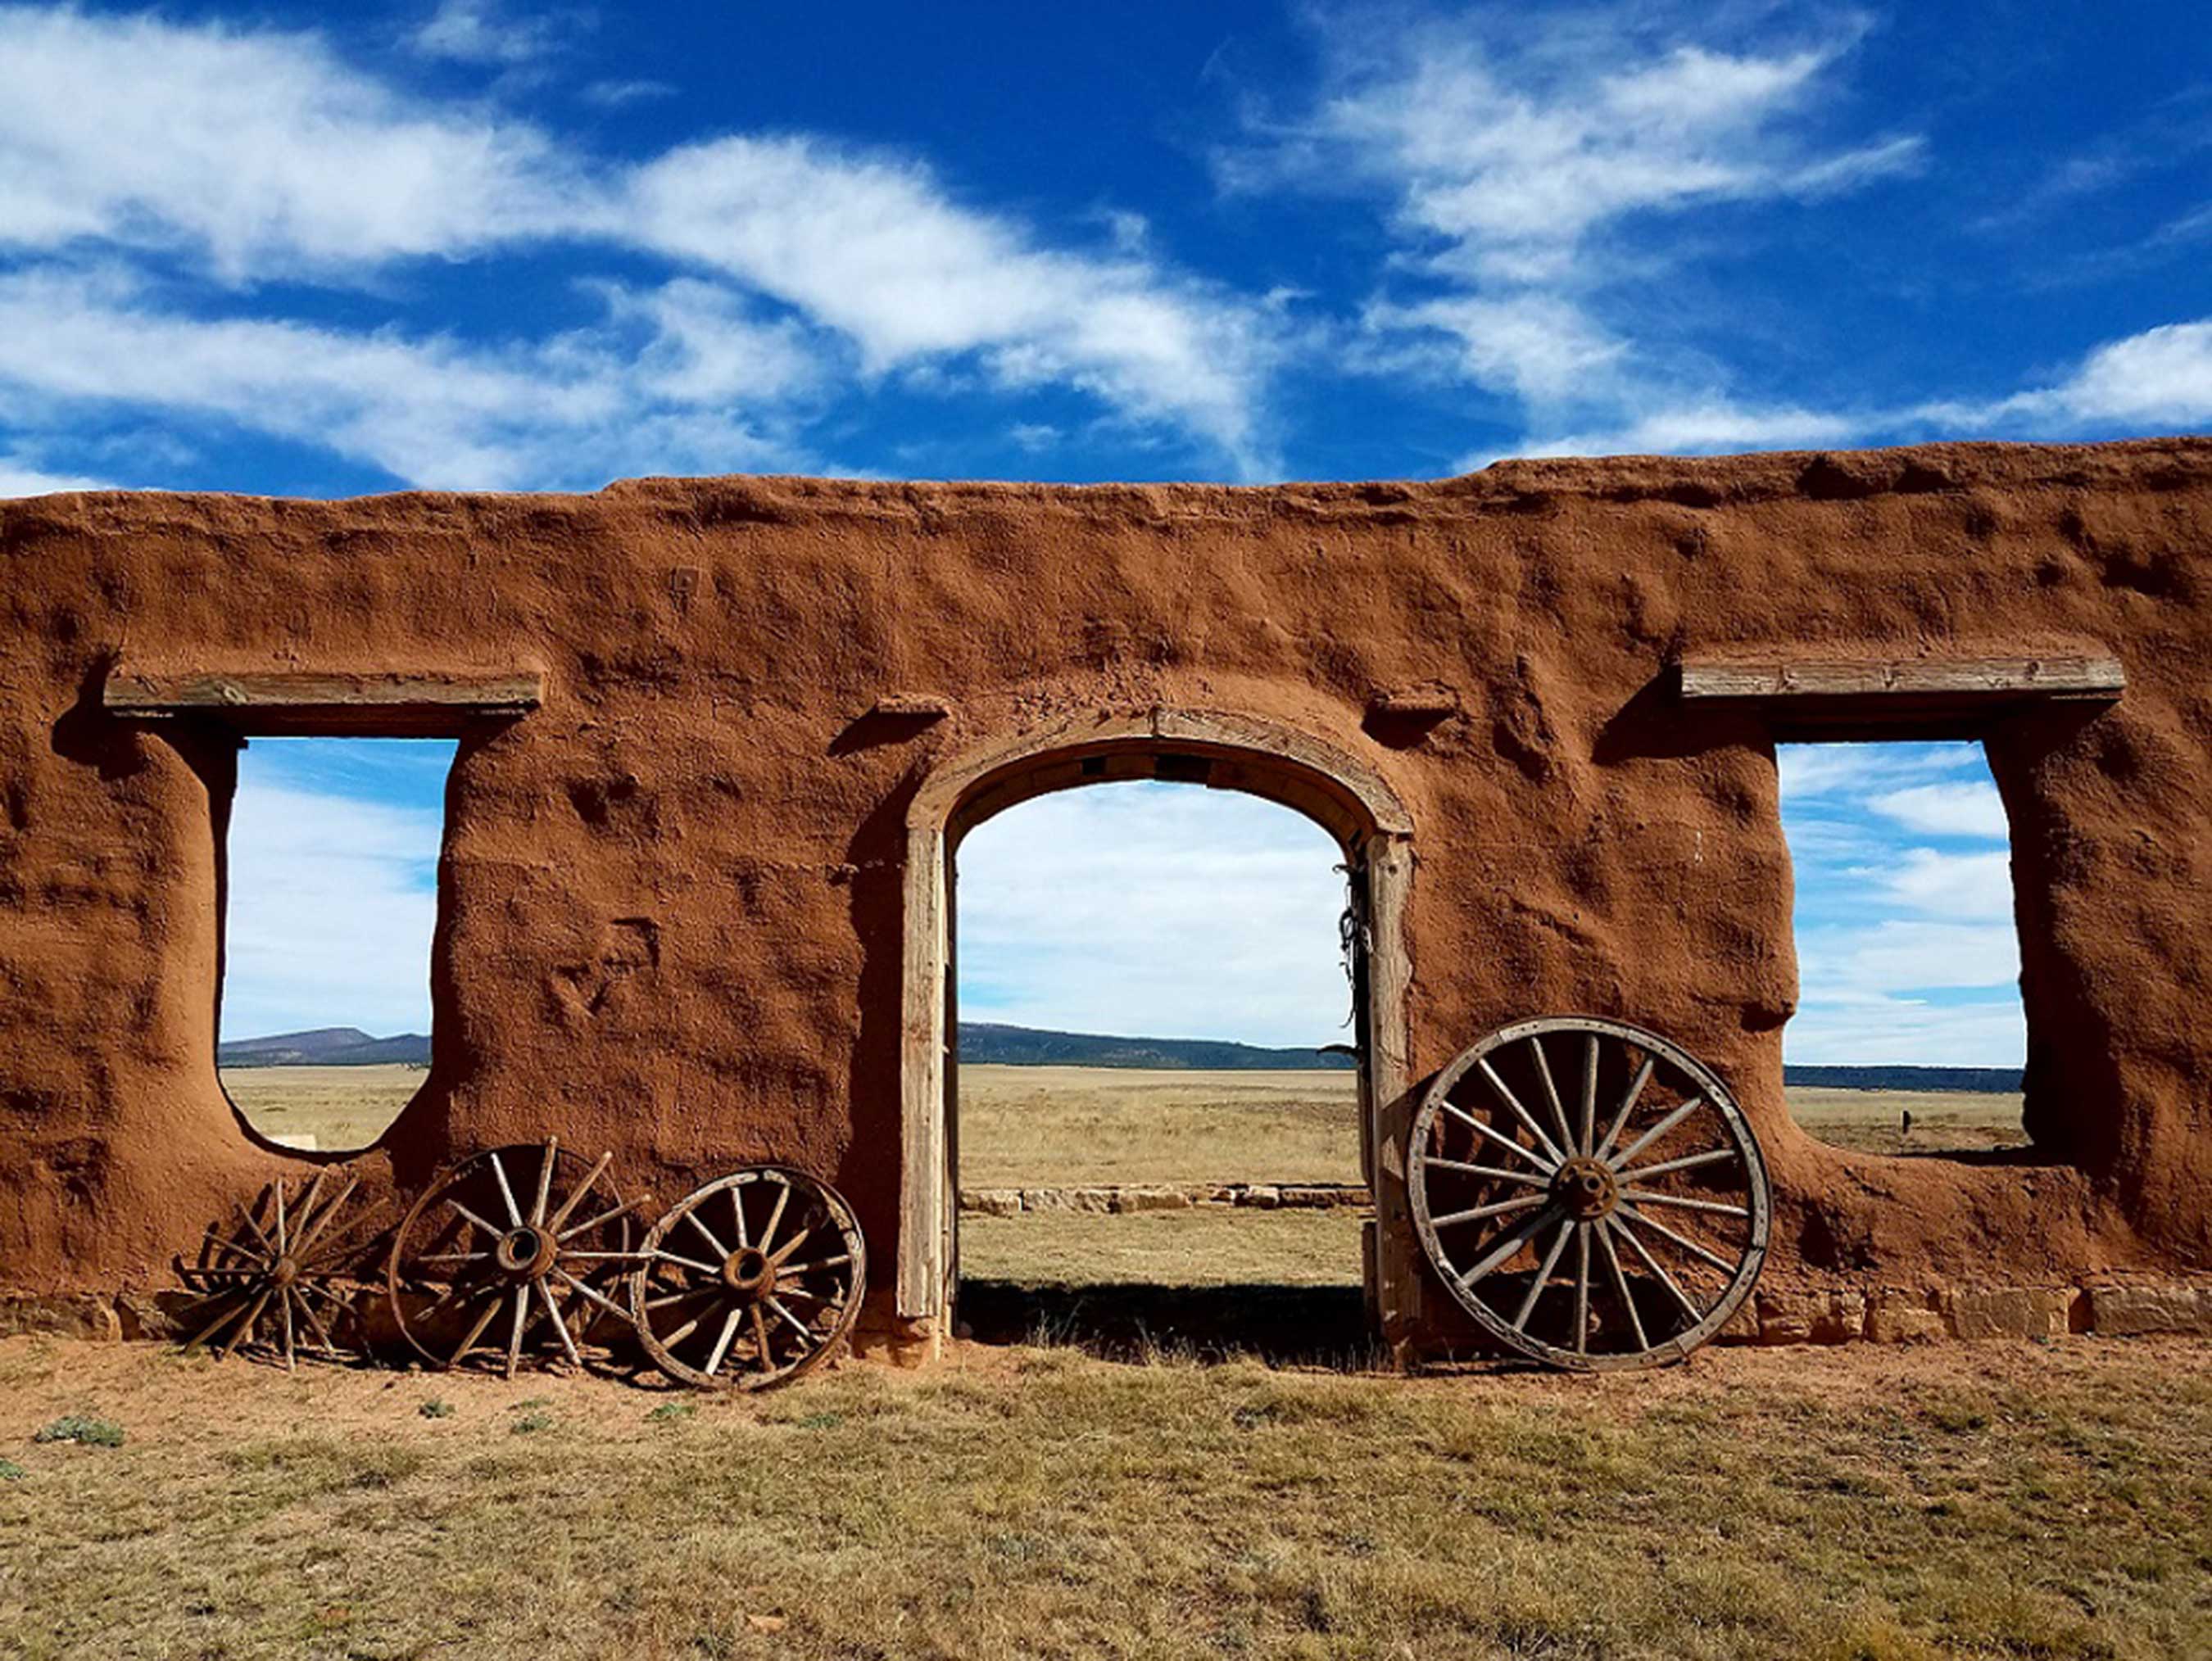 Share the Experience photo contest, Fort Union National Monument in New Mexico/Kristy Burns